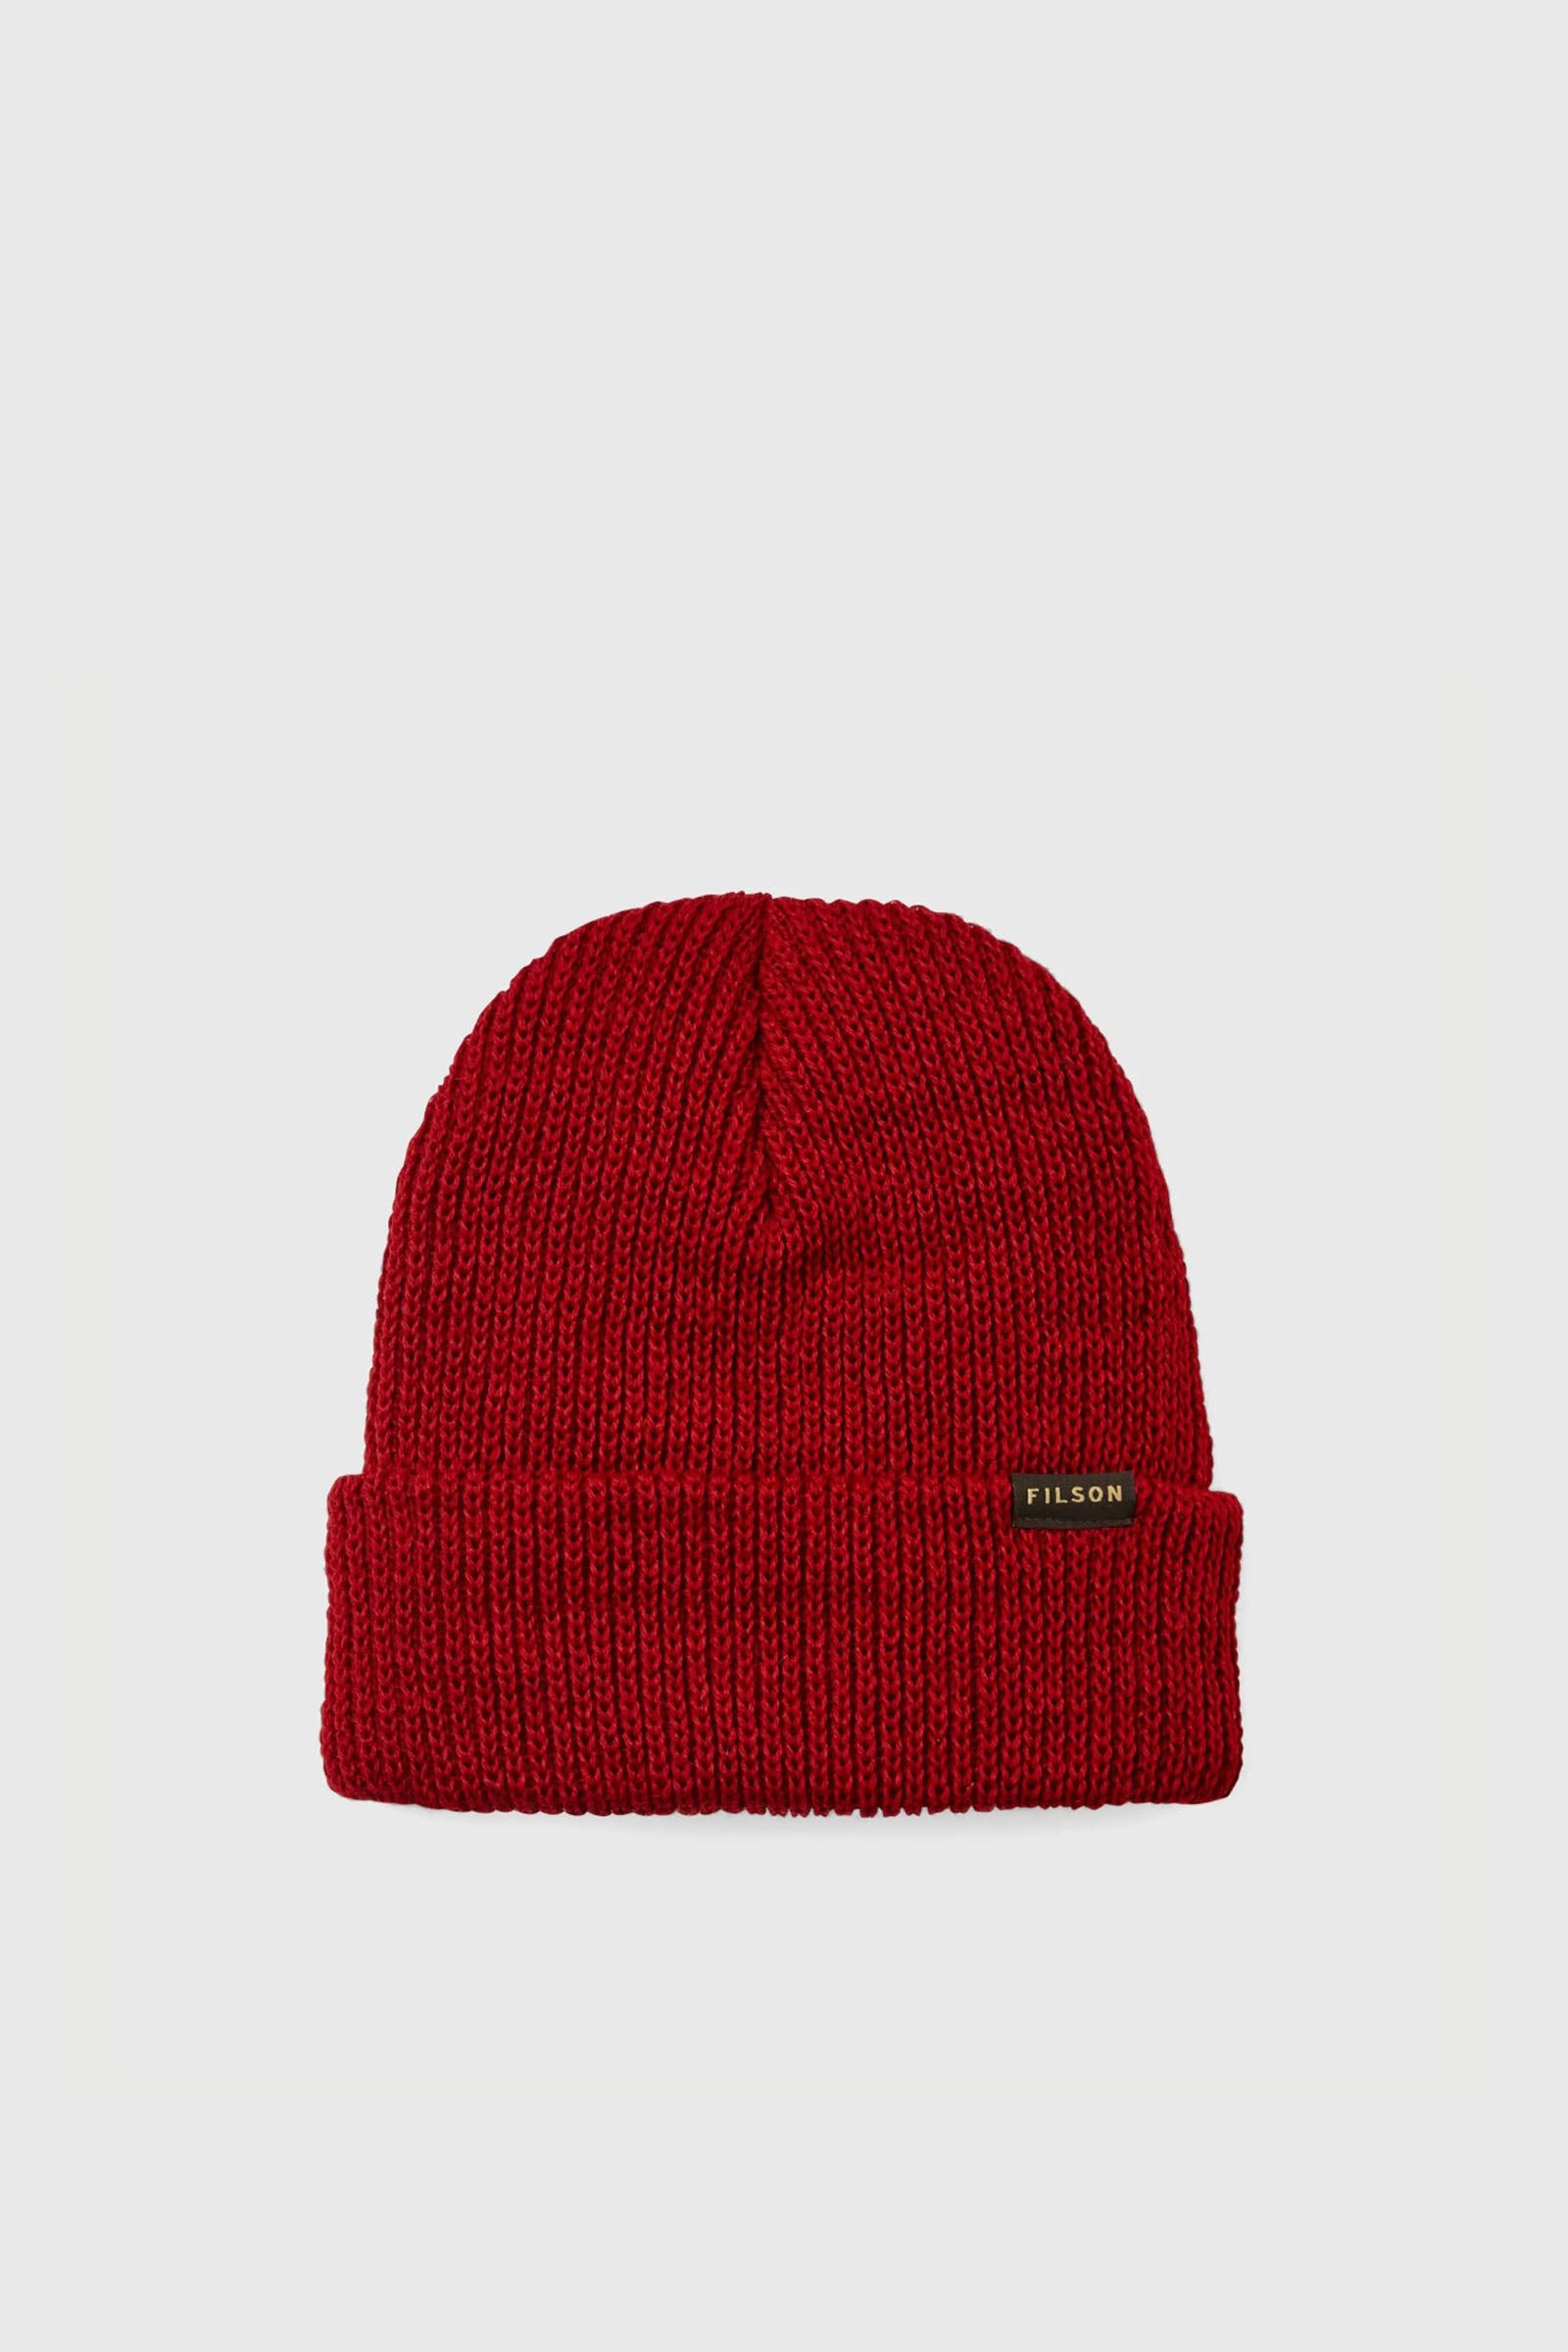 Filson Watch Synthetic Wool Cap Red - 1